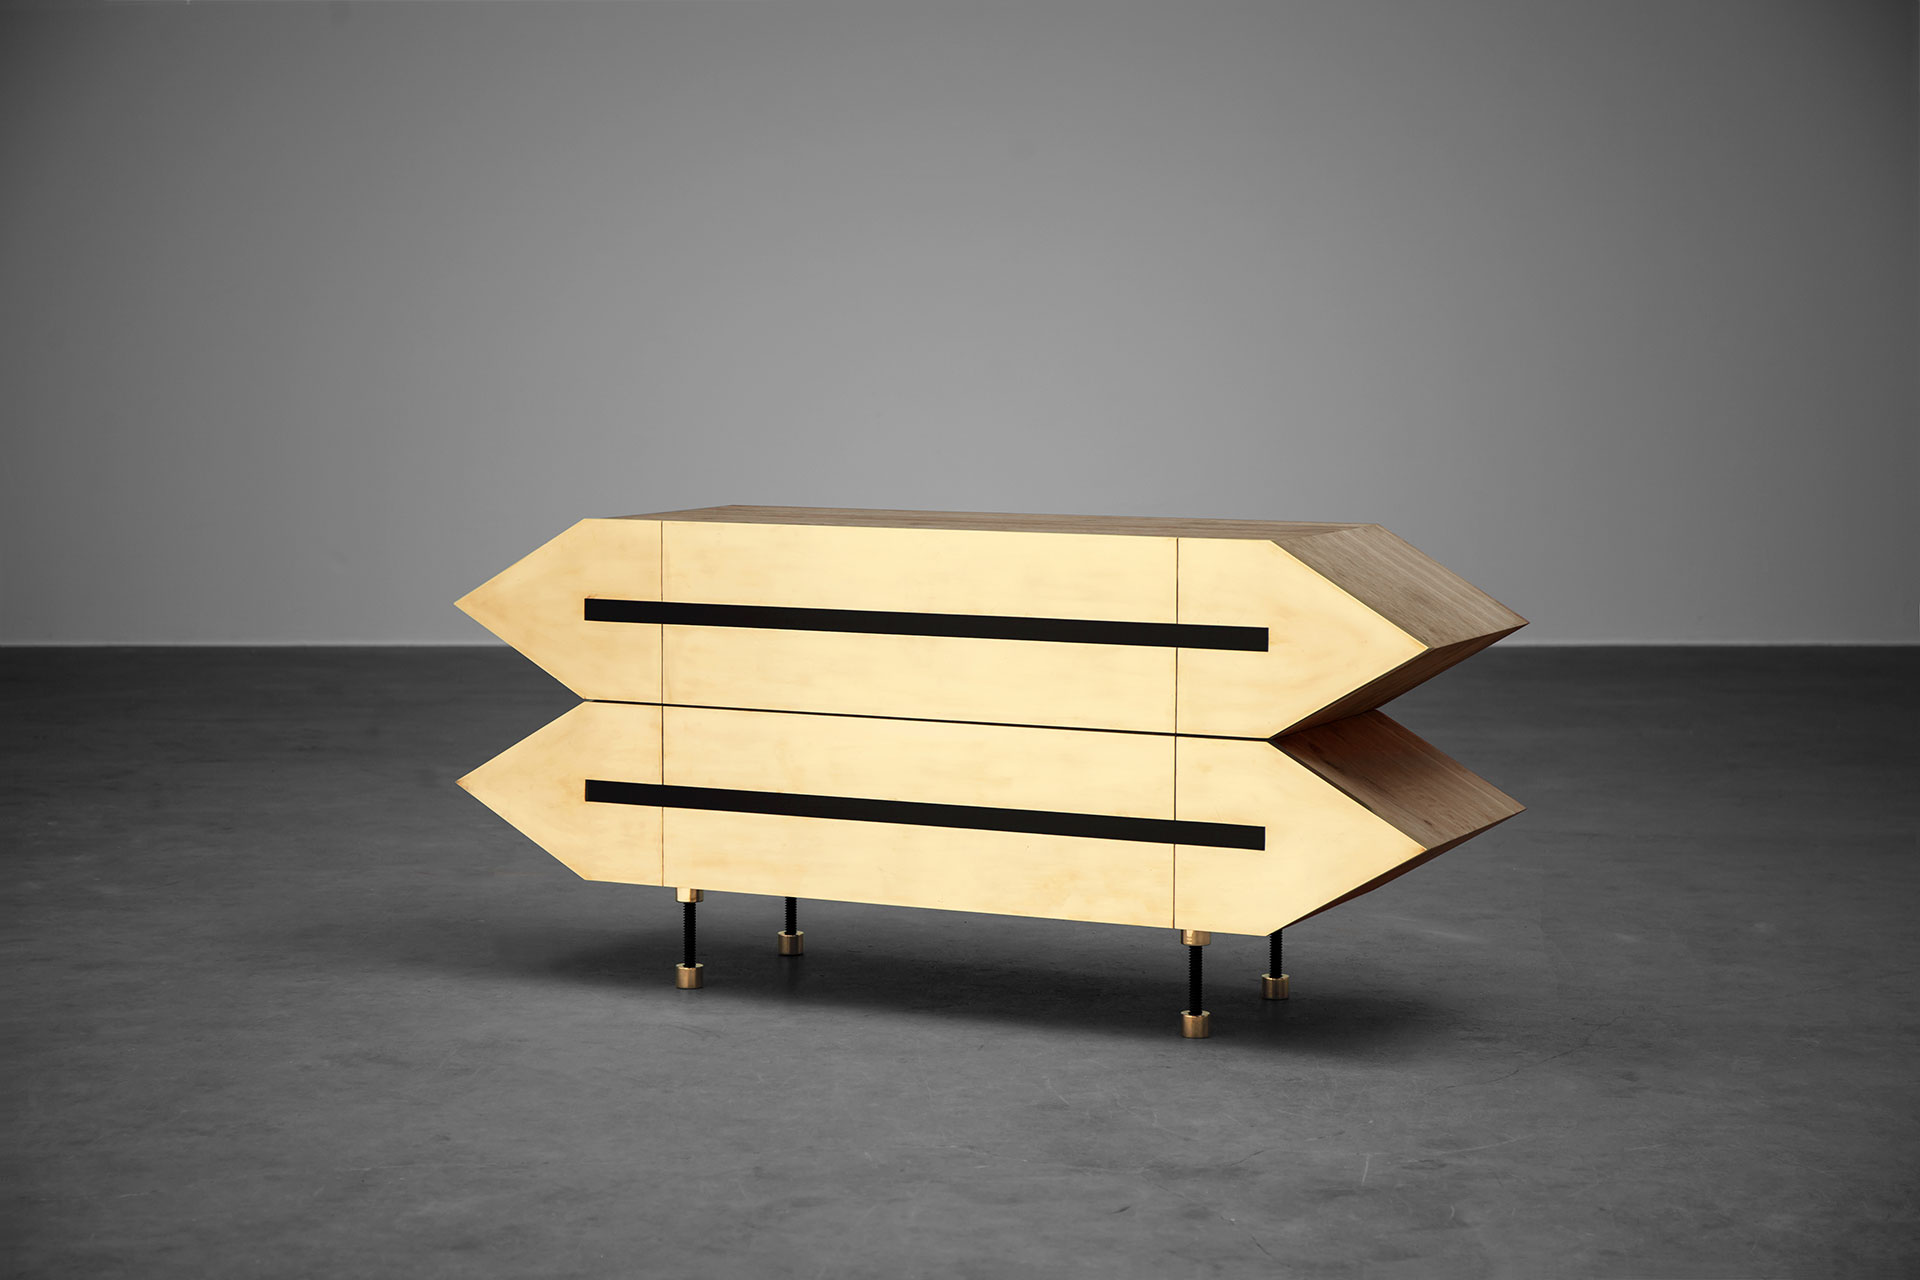 Wood and brass furniture inspired by brutalist design